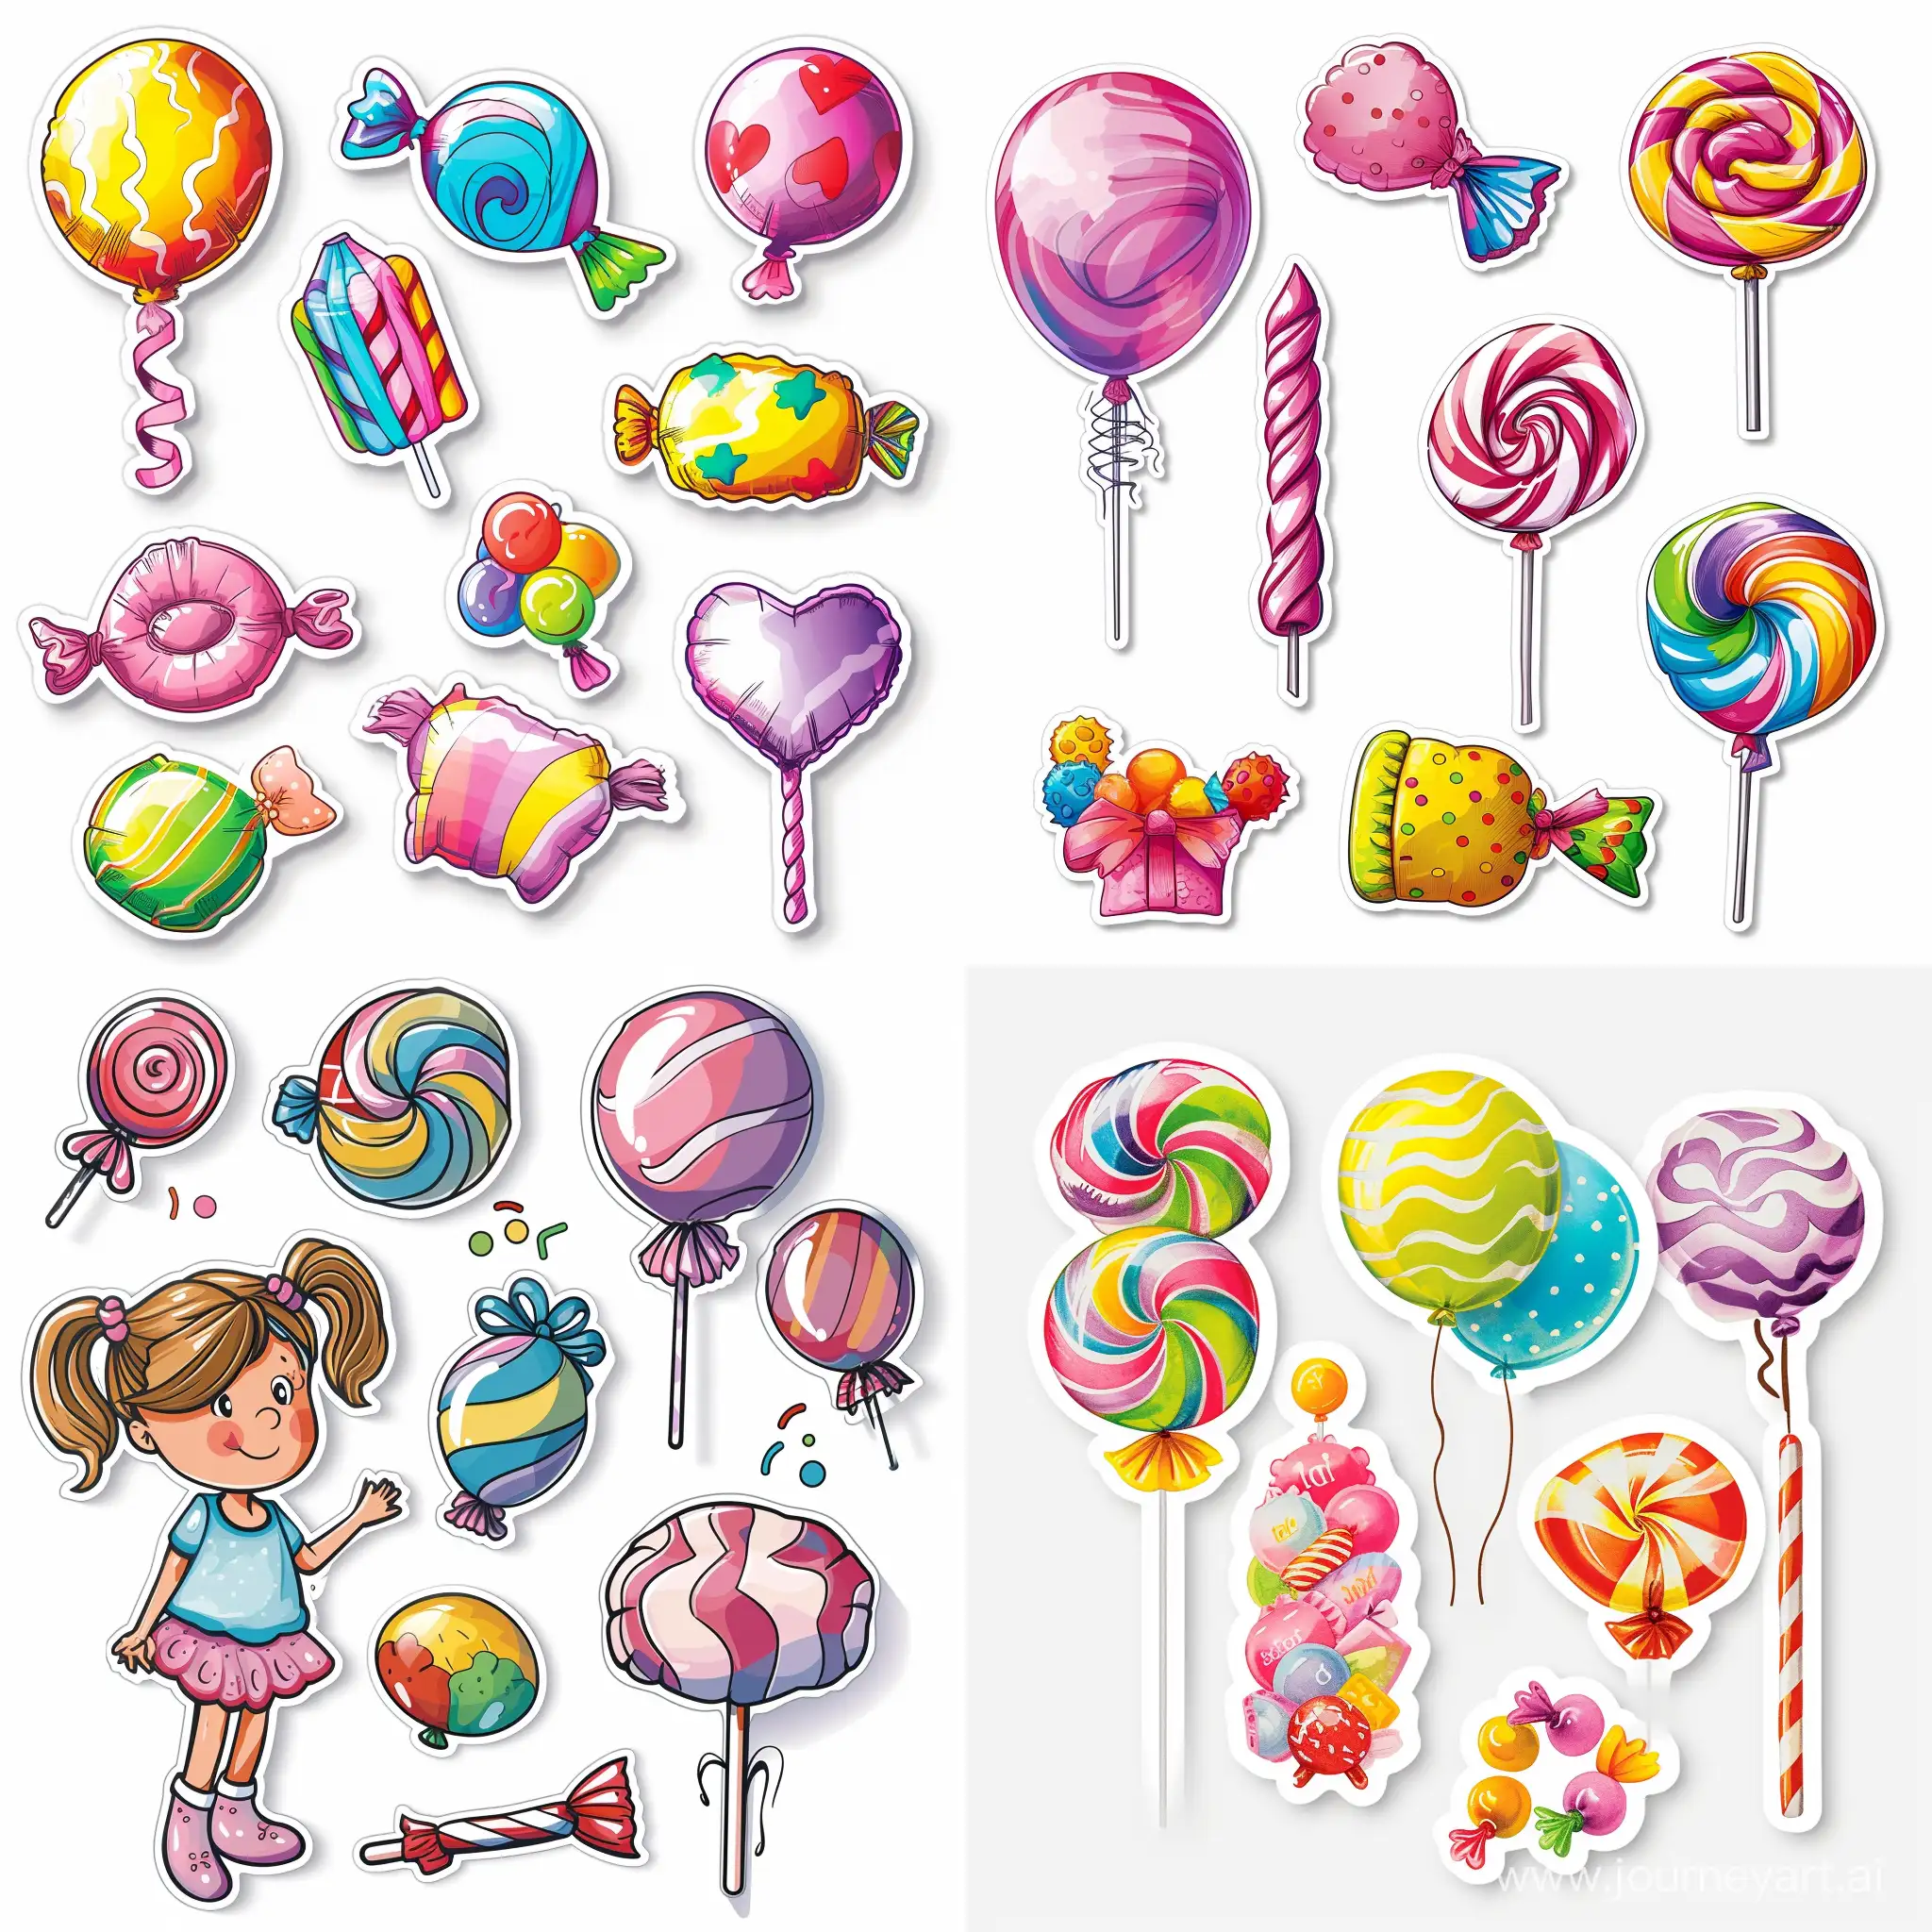 Joyful-Family-Decorating-with-Candy-Stickers-Toys-and-Balloons